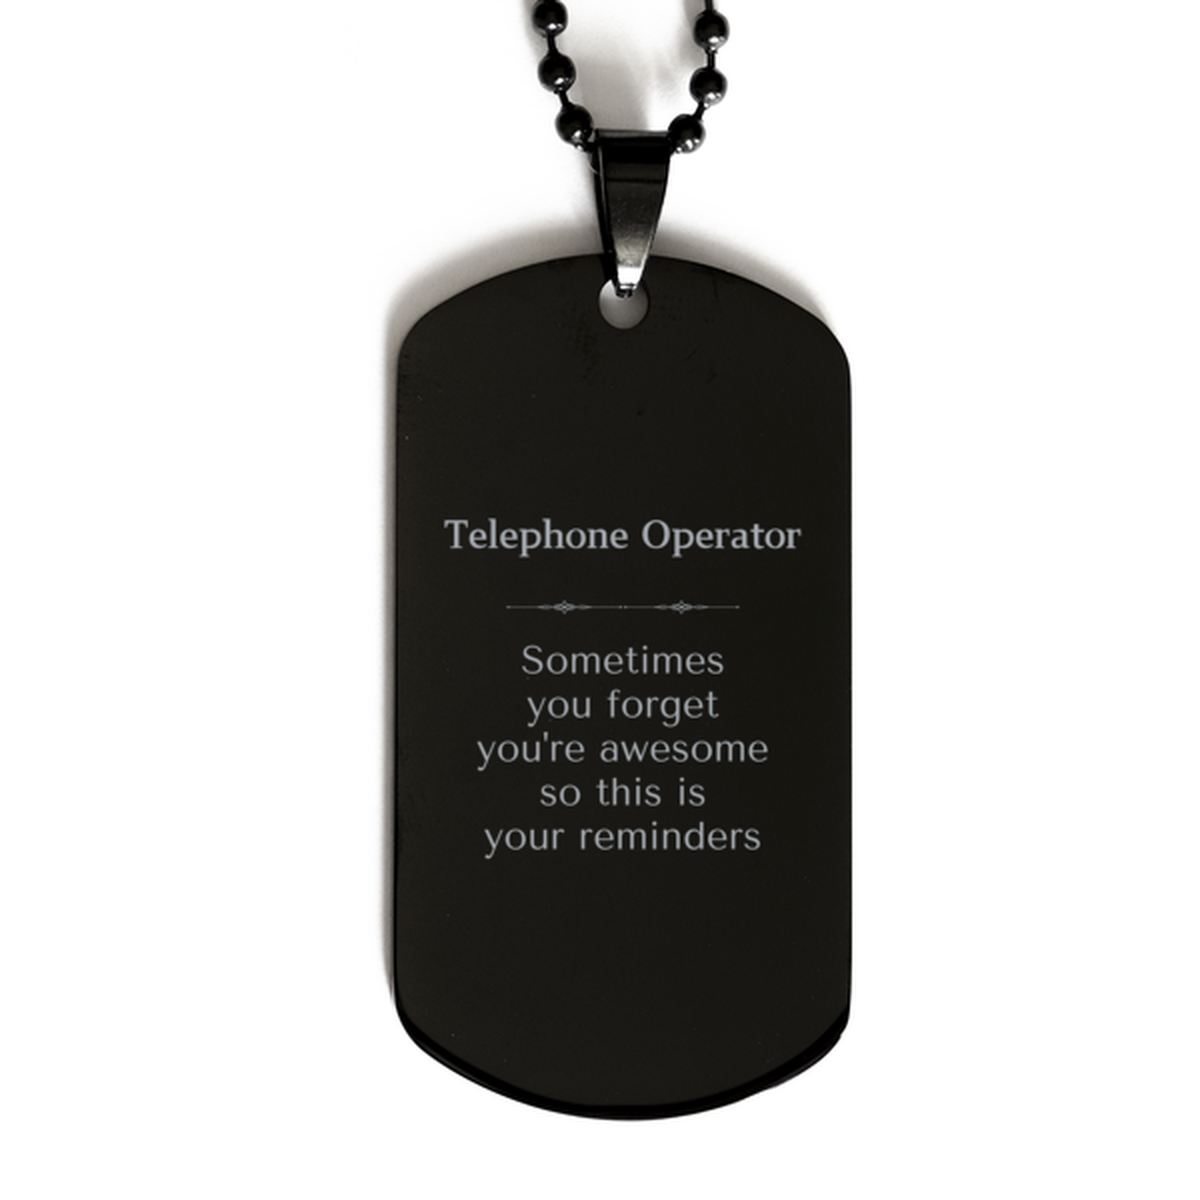 Sentimental Telephone Operator Black Dog Tag, Telephone Operator Sometimes you forget you're awesome so this is your reminders, Graduation Christmas Birthday Gifts for Telephone Operator, Men, Women, Coworkers